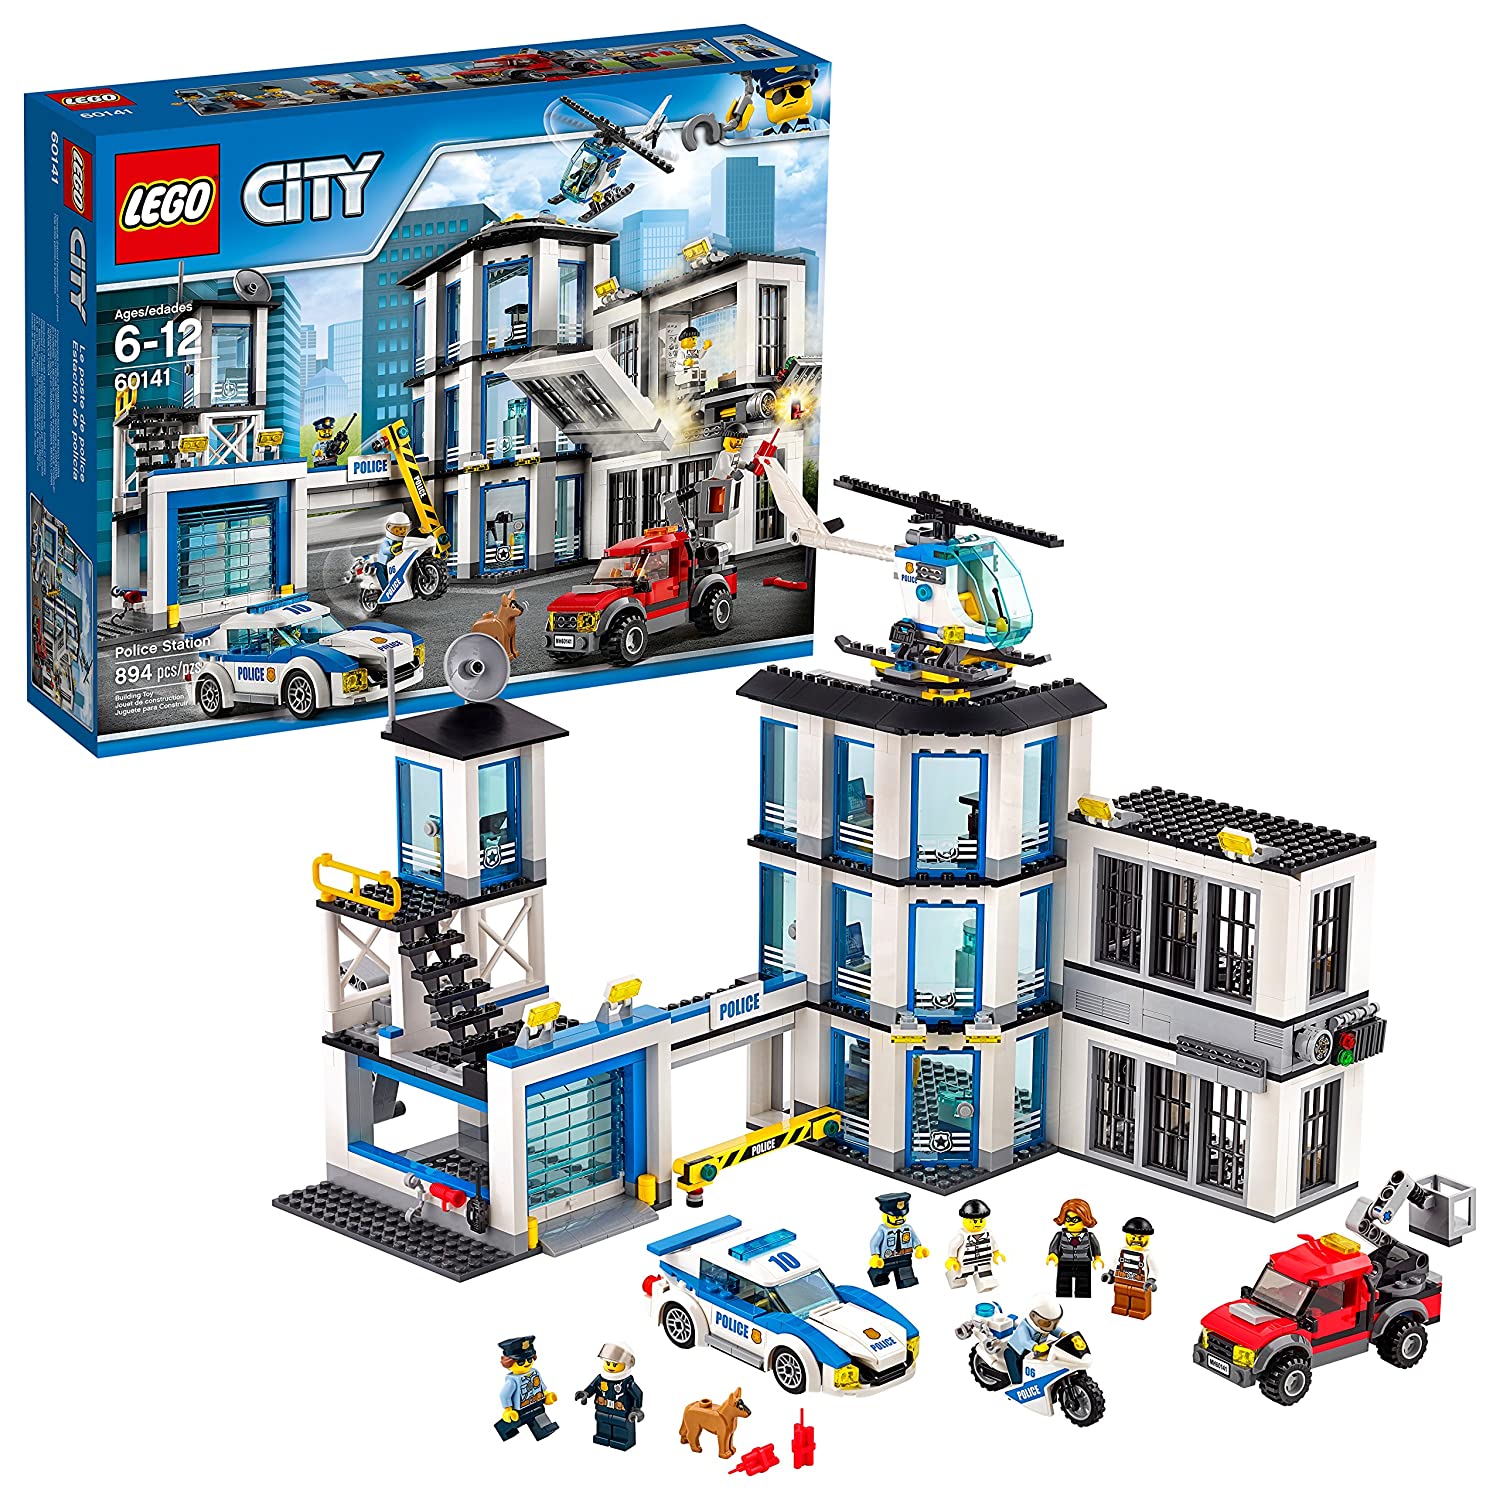 9 Best LEGO Police Station Set 2023 - Buying Guide & Reviews 1